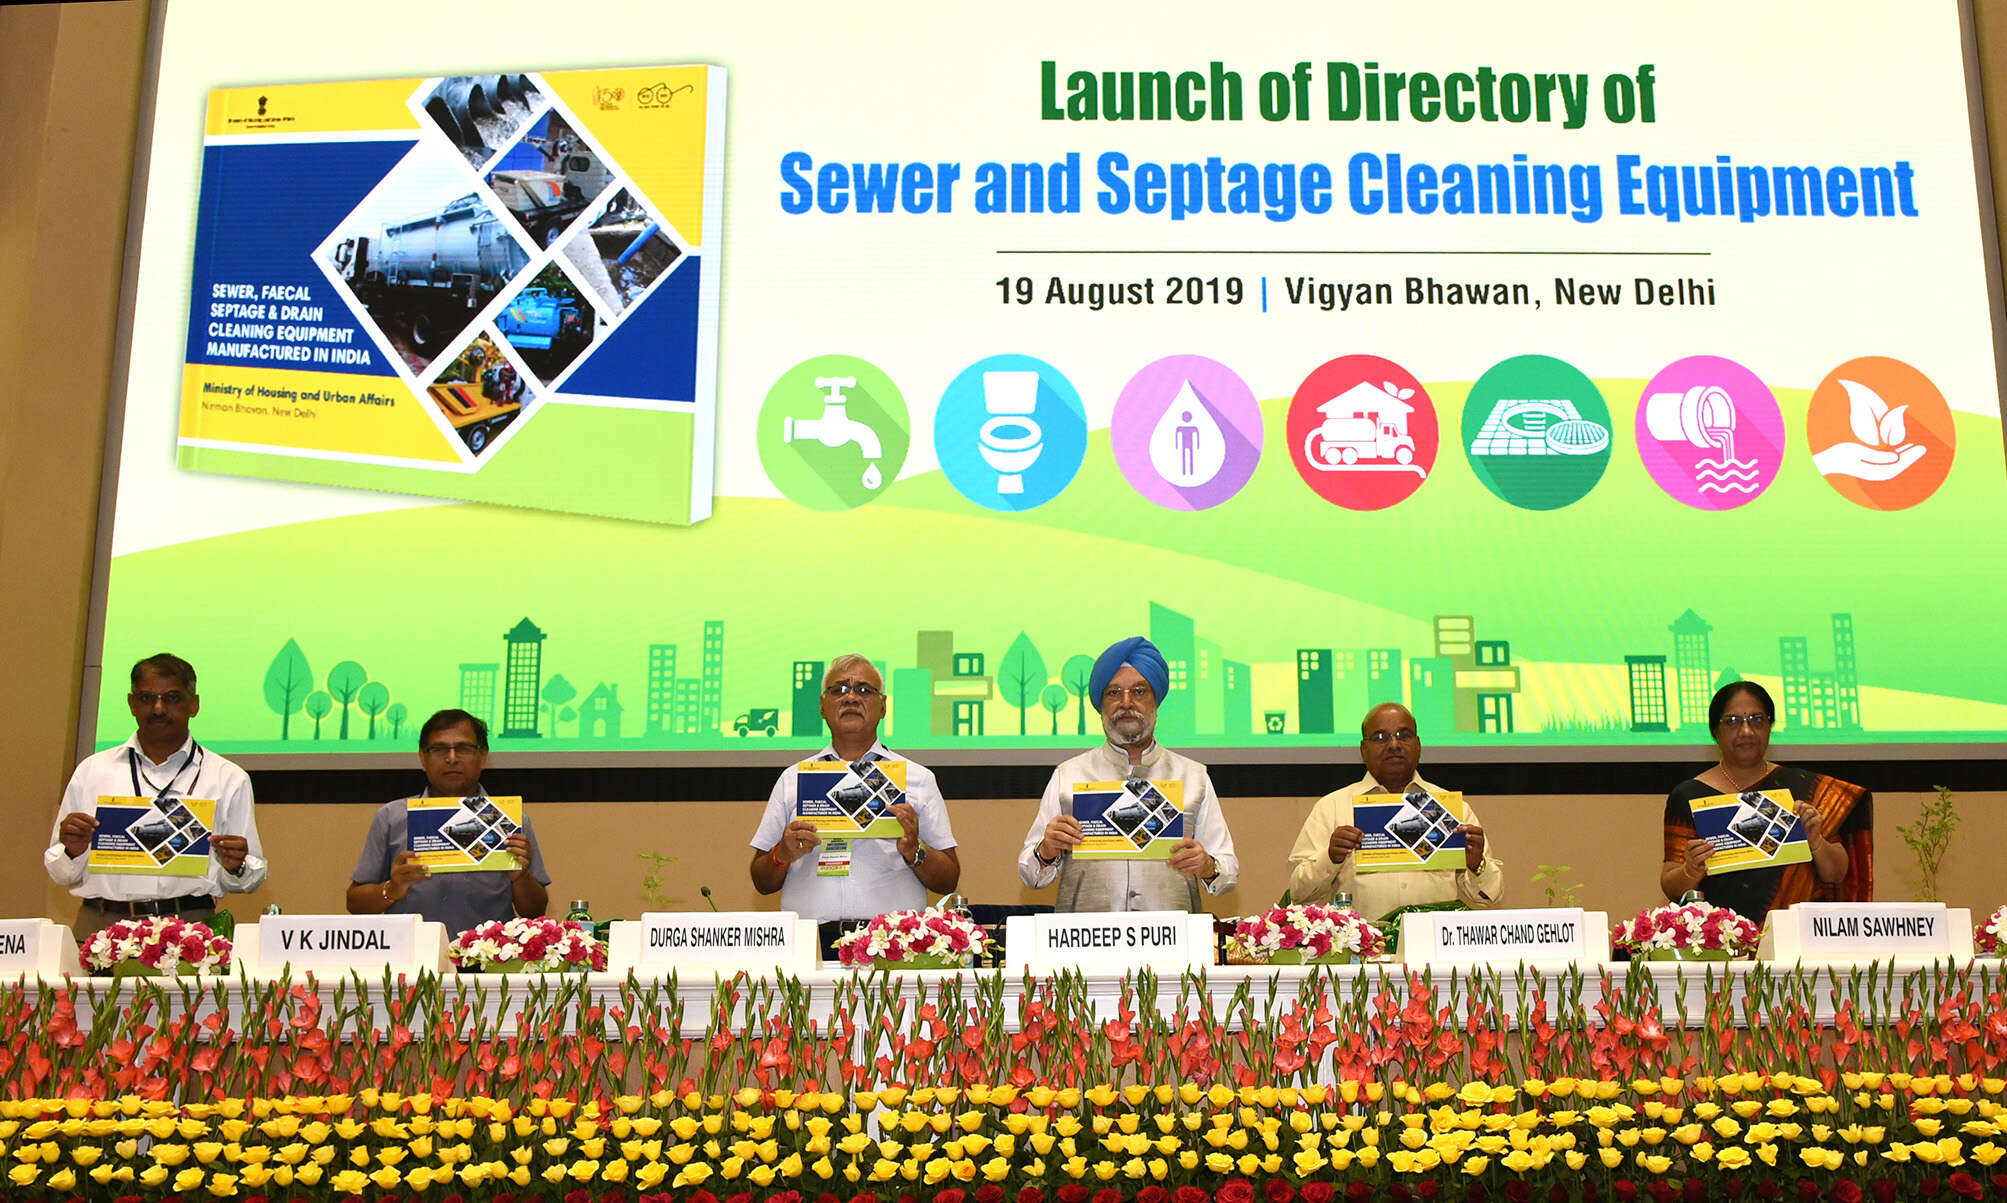 The Union Minister for Social Justice and Empowerment,  Thaawar Chand Gehlot and the Minister of State for Housing & Urban Affairs, Civil Aviation (Independent Charge) and Commerce & Industry, Hardeep Singh Puri launching the directory of Sewer and Septage Cleaning Equipment, at the National Workshop Cum-Exhibition on Sustainable Sanitation, jointly organised by the Ministry of Social Justice & Empowerment and Ministry of Housing & Urban Affairs, in New Delhi on August 19, 2019. The Secretary, Ministry of S